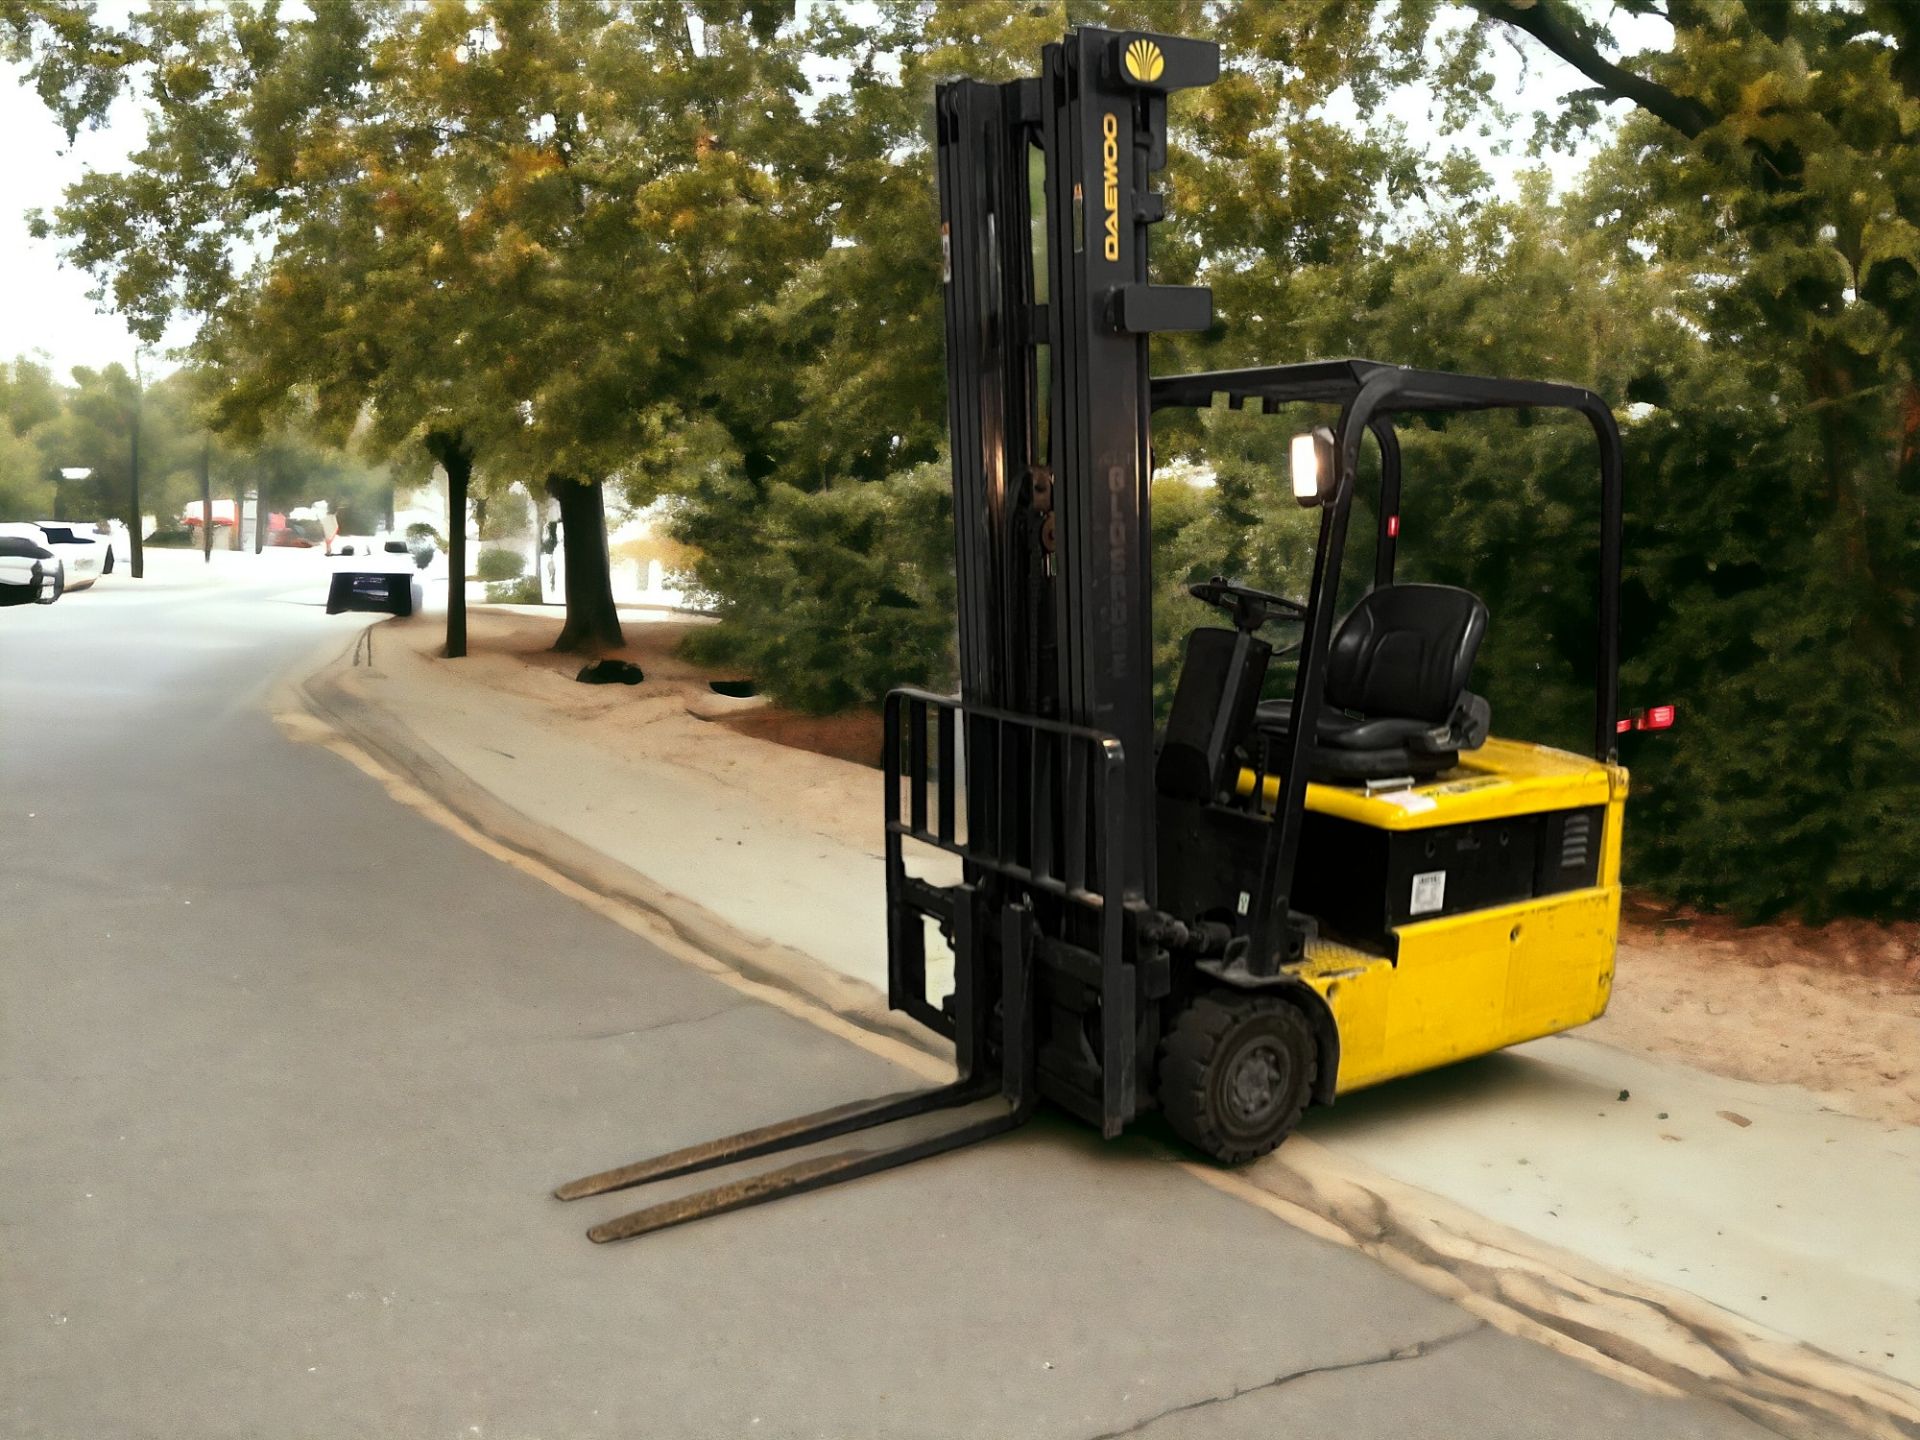 DAEWOO ELECTRIC 3-WHEEL FORKLIFT - MODEL B18T-2 (2002) **(INCLUDES CHARGER)** - Image 3 of 6